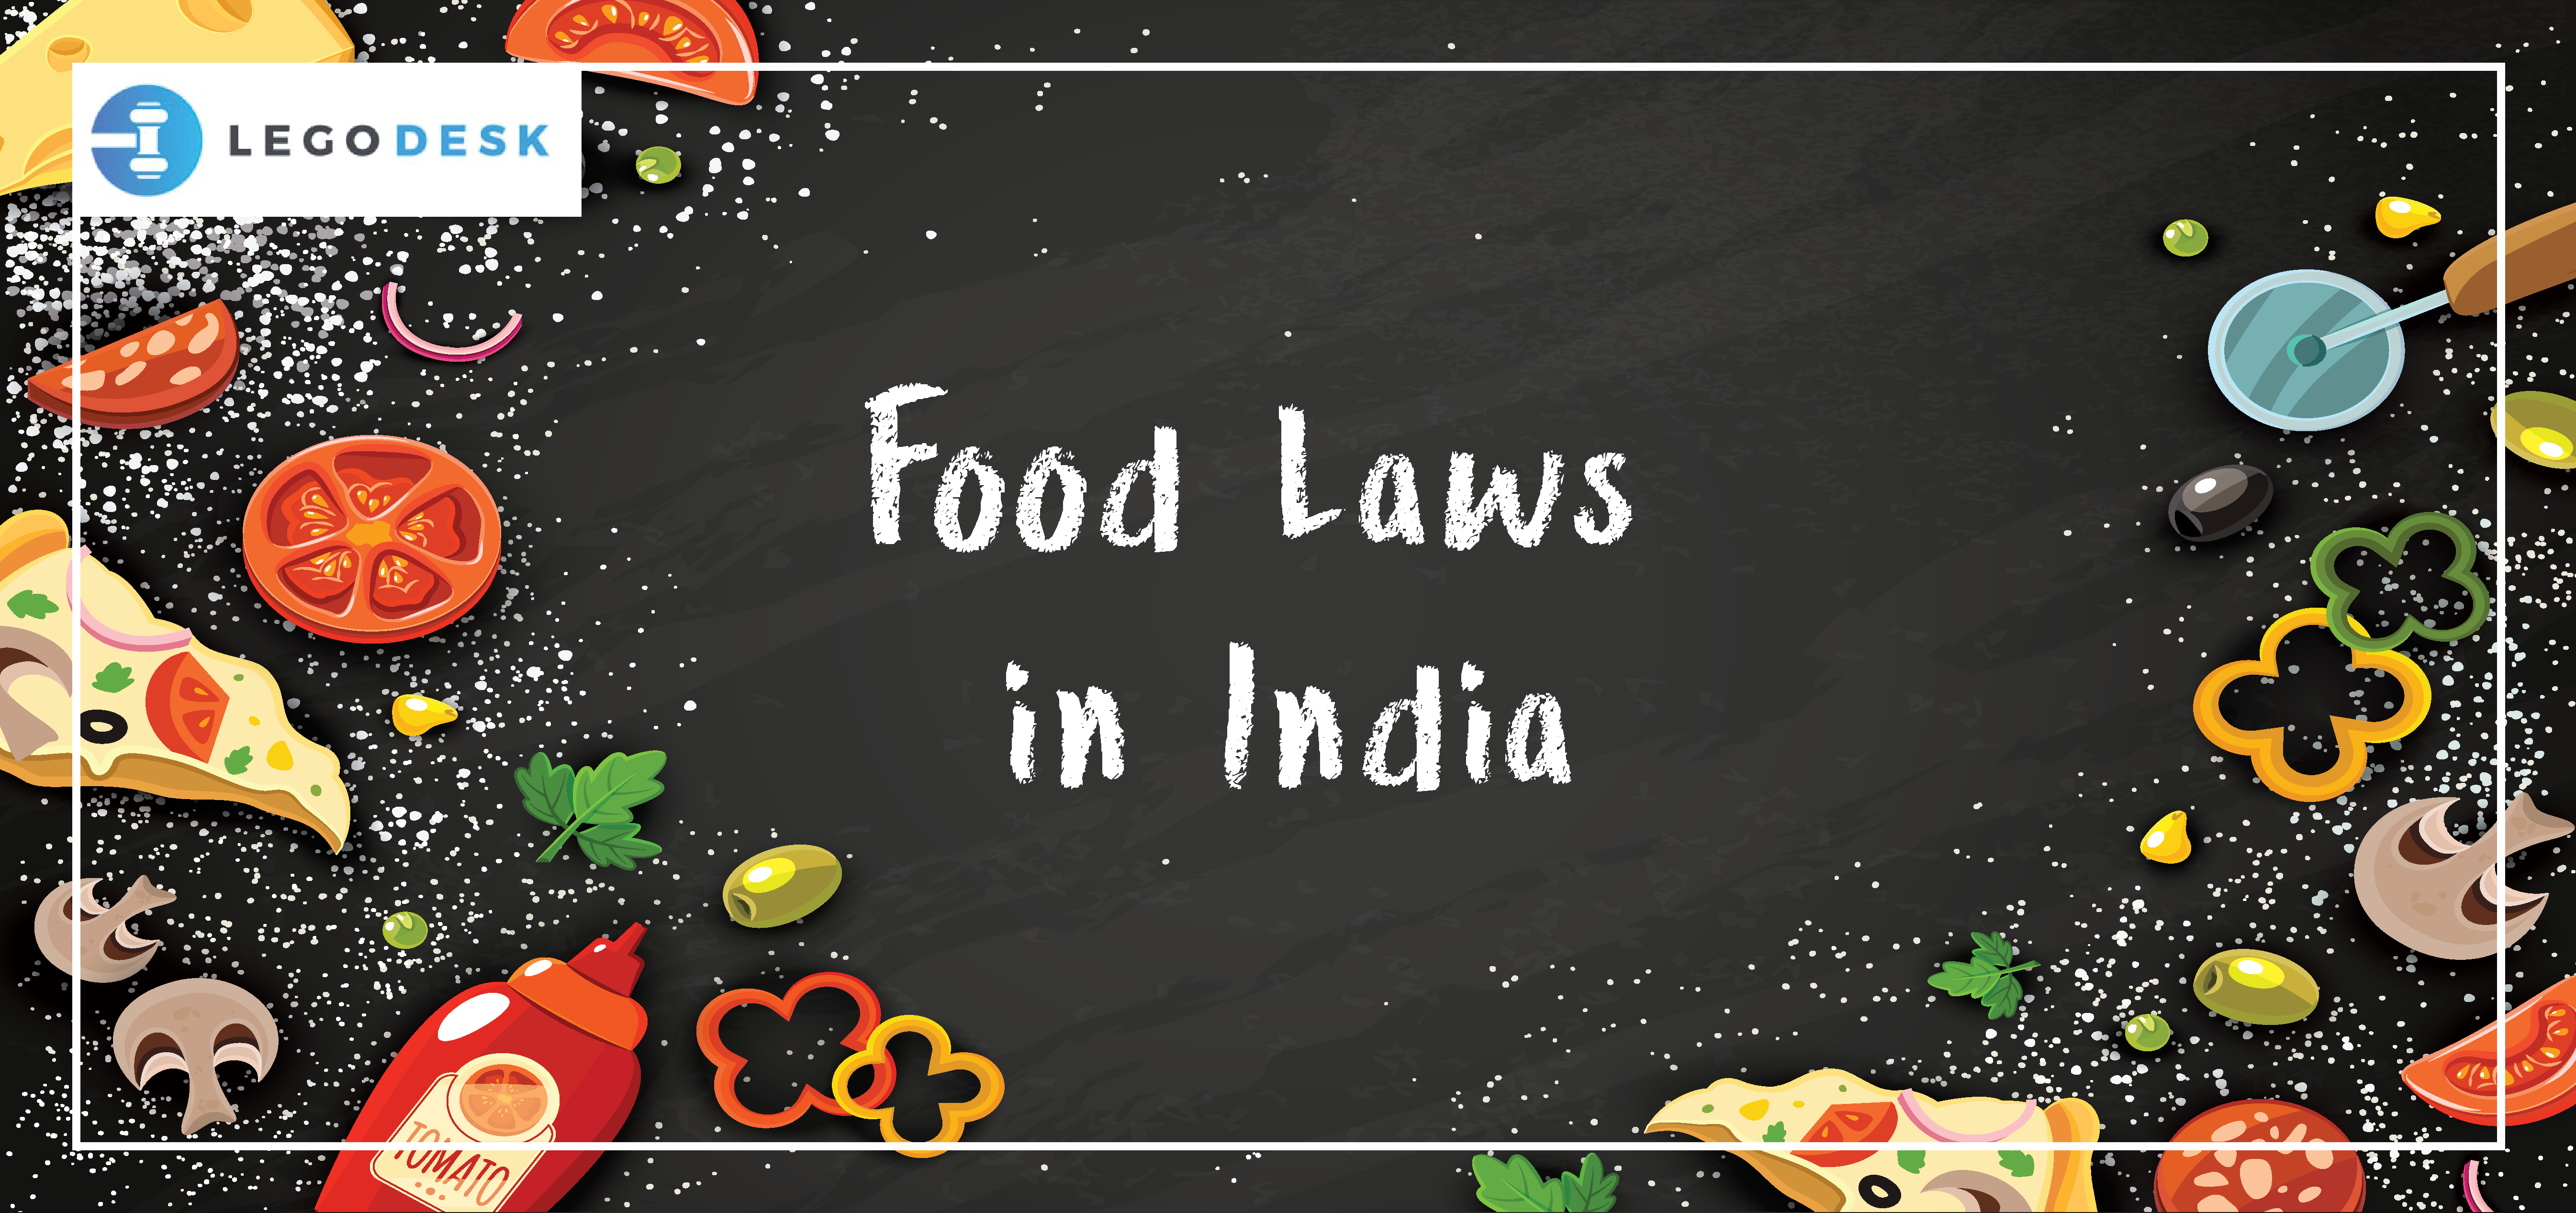 Food Laws in India